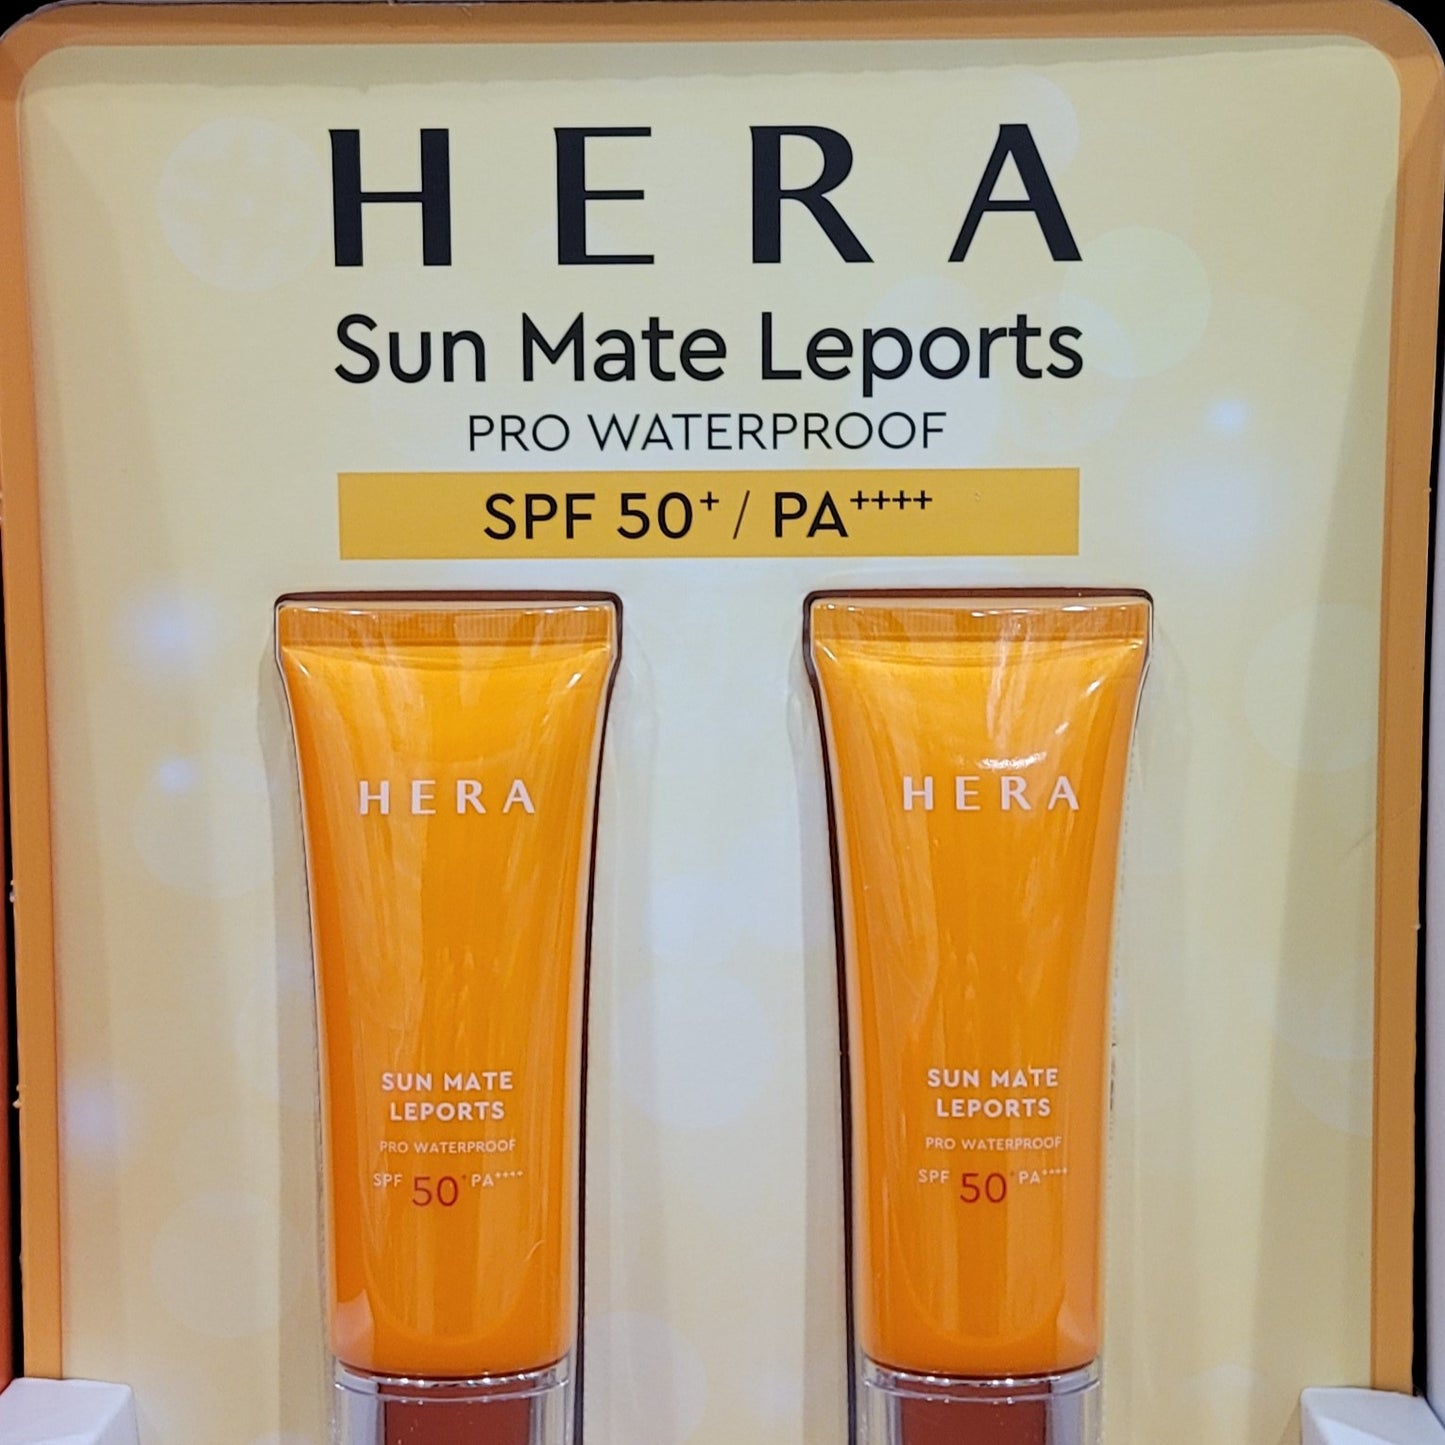 Hera Sun Mate Leports Pro SPF50/ PA+++70ml x 2ea /Sunblock and Makeup base/2-in-One